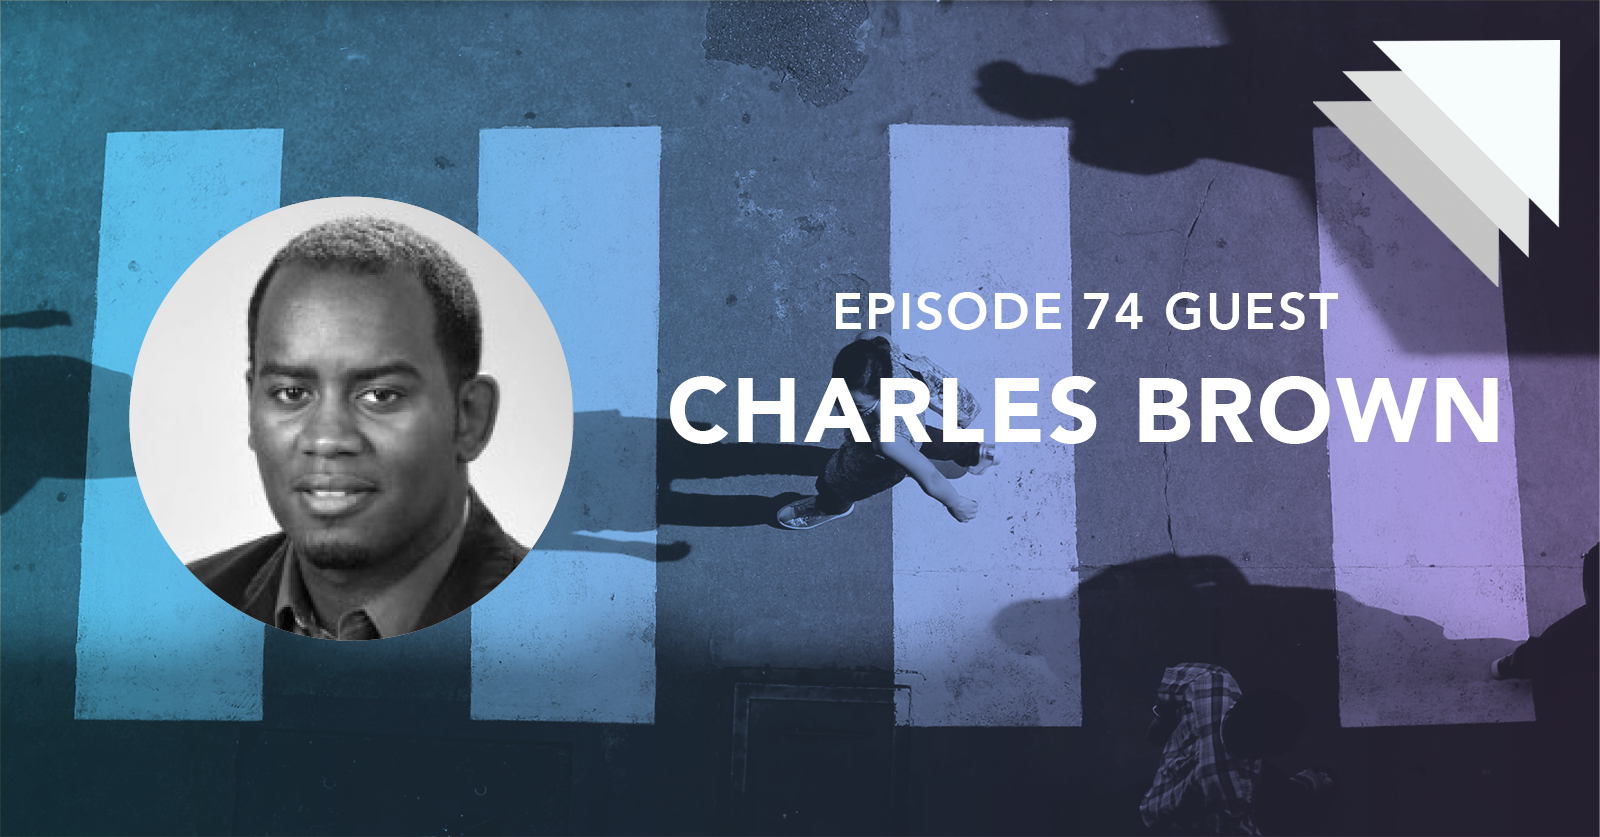 Episode 74 guest Charles Brown